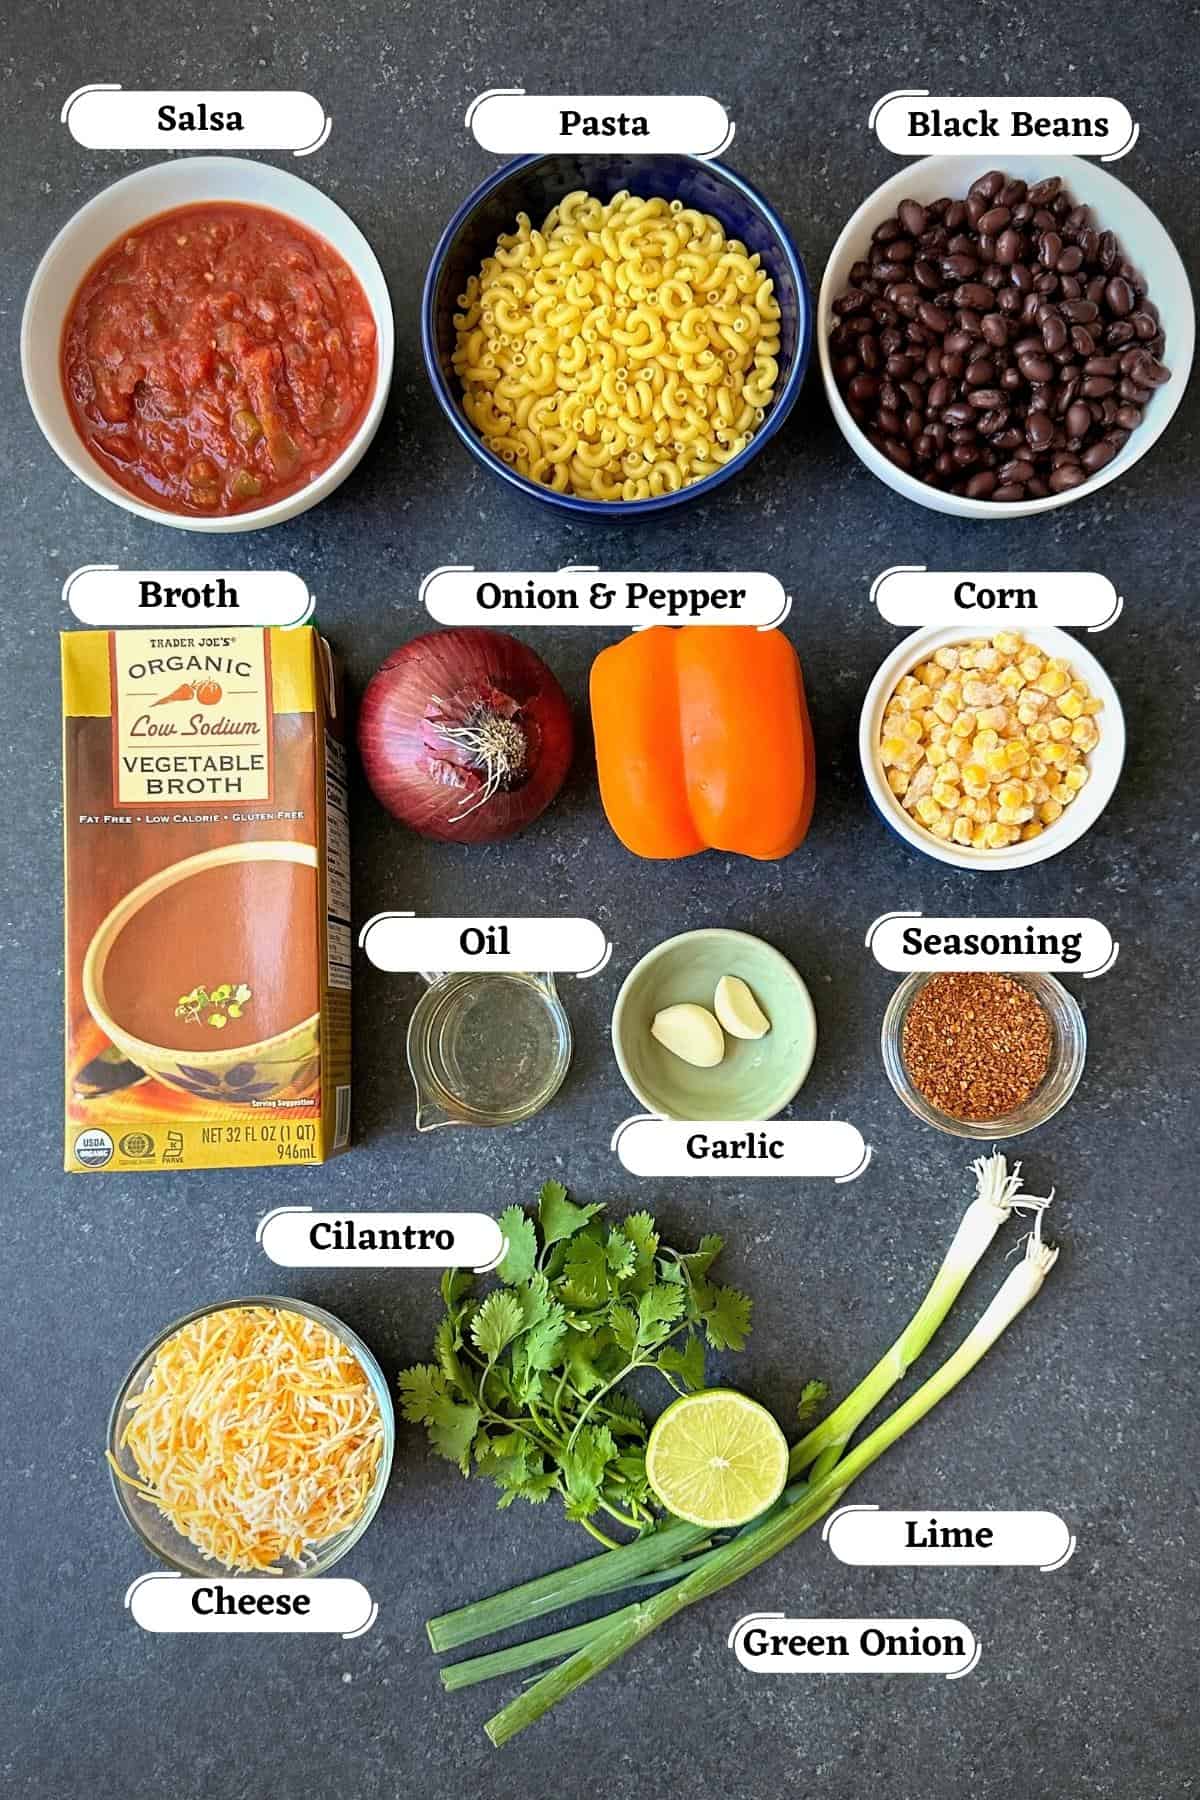 salsa, pasta, beans, spices, and broth, among other ingredients for taco pasta spread out on grey board